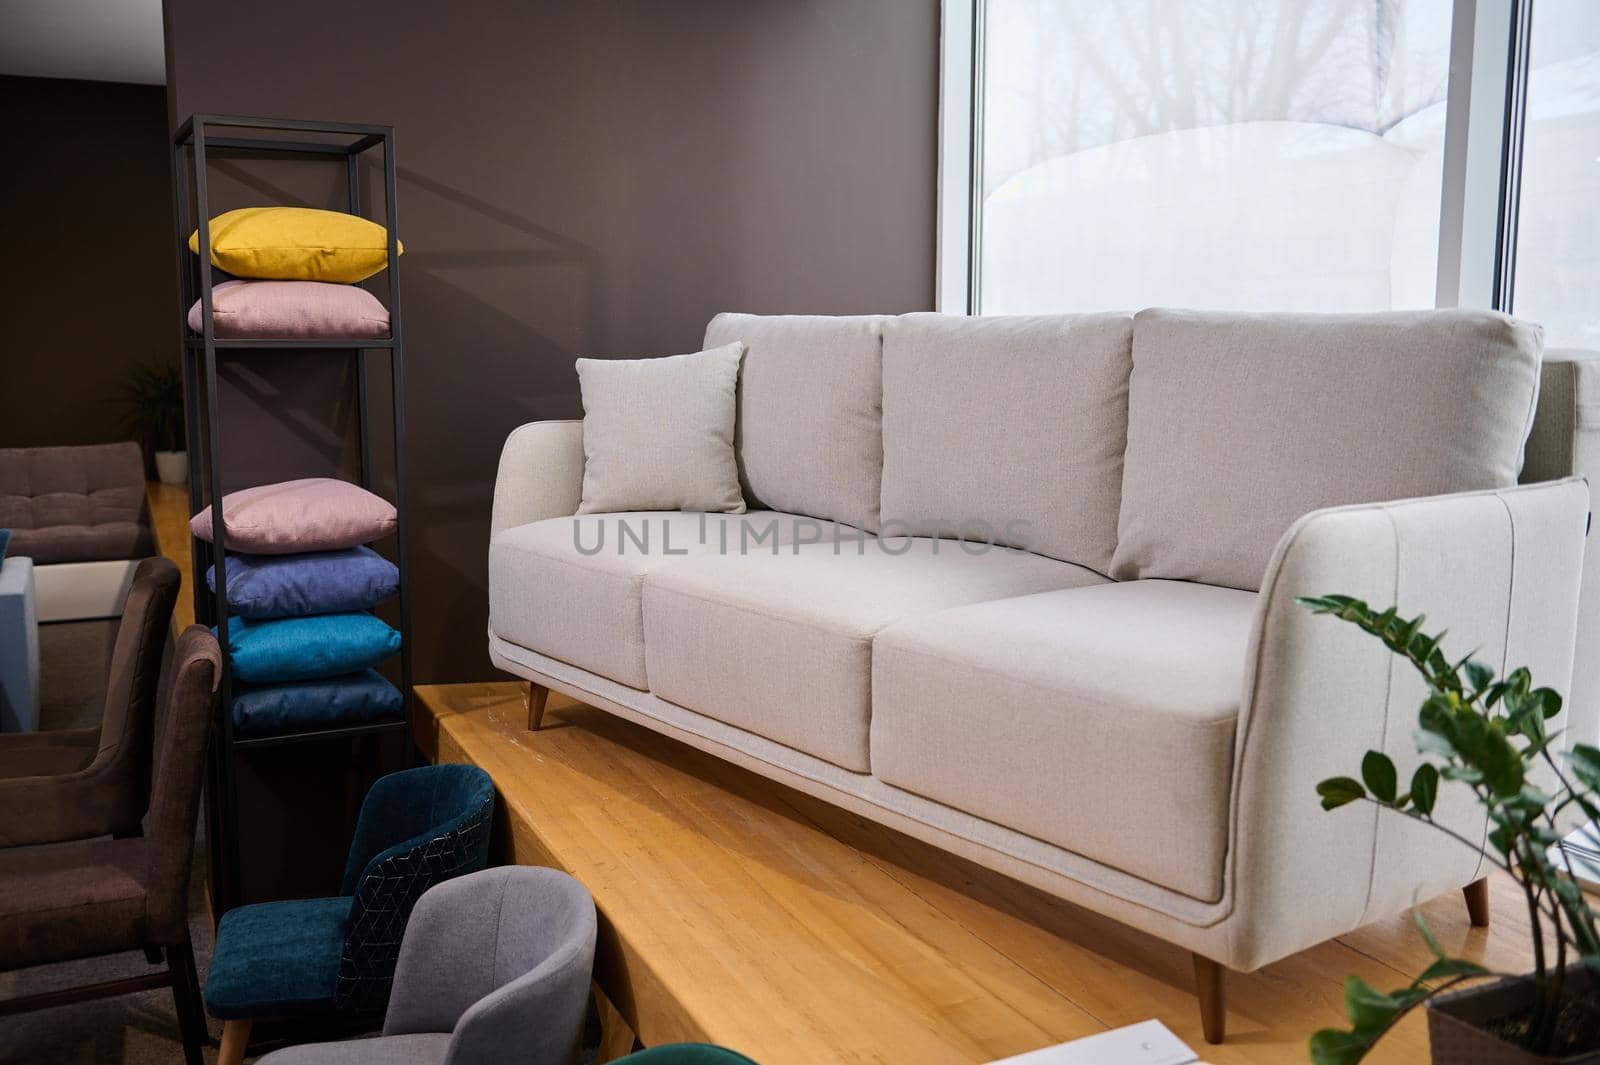 Stylish minimalist white settee with pillows displayed for sale in a showroom of modern furniture, next to stand with colorful cushions from fabrics of different texture, softness, colors and quality by artgf